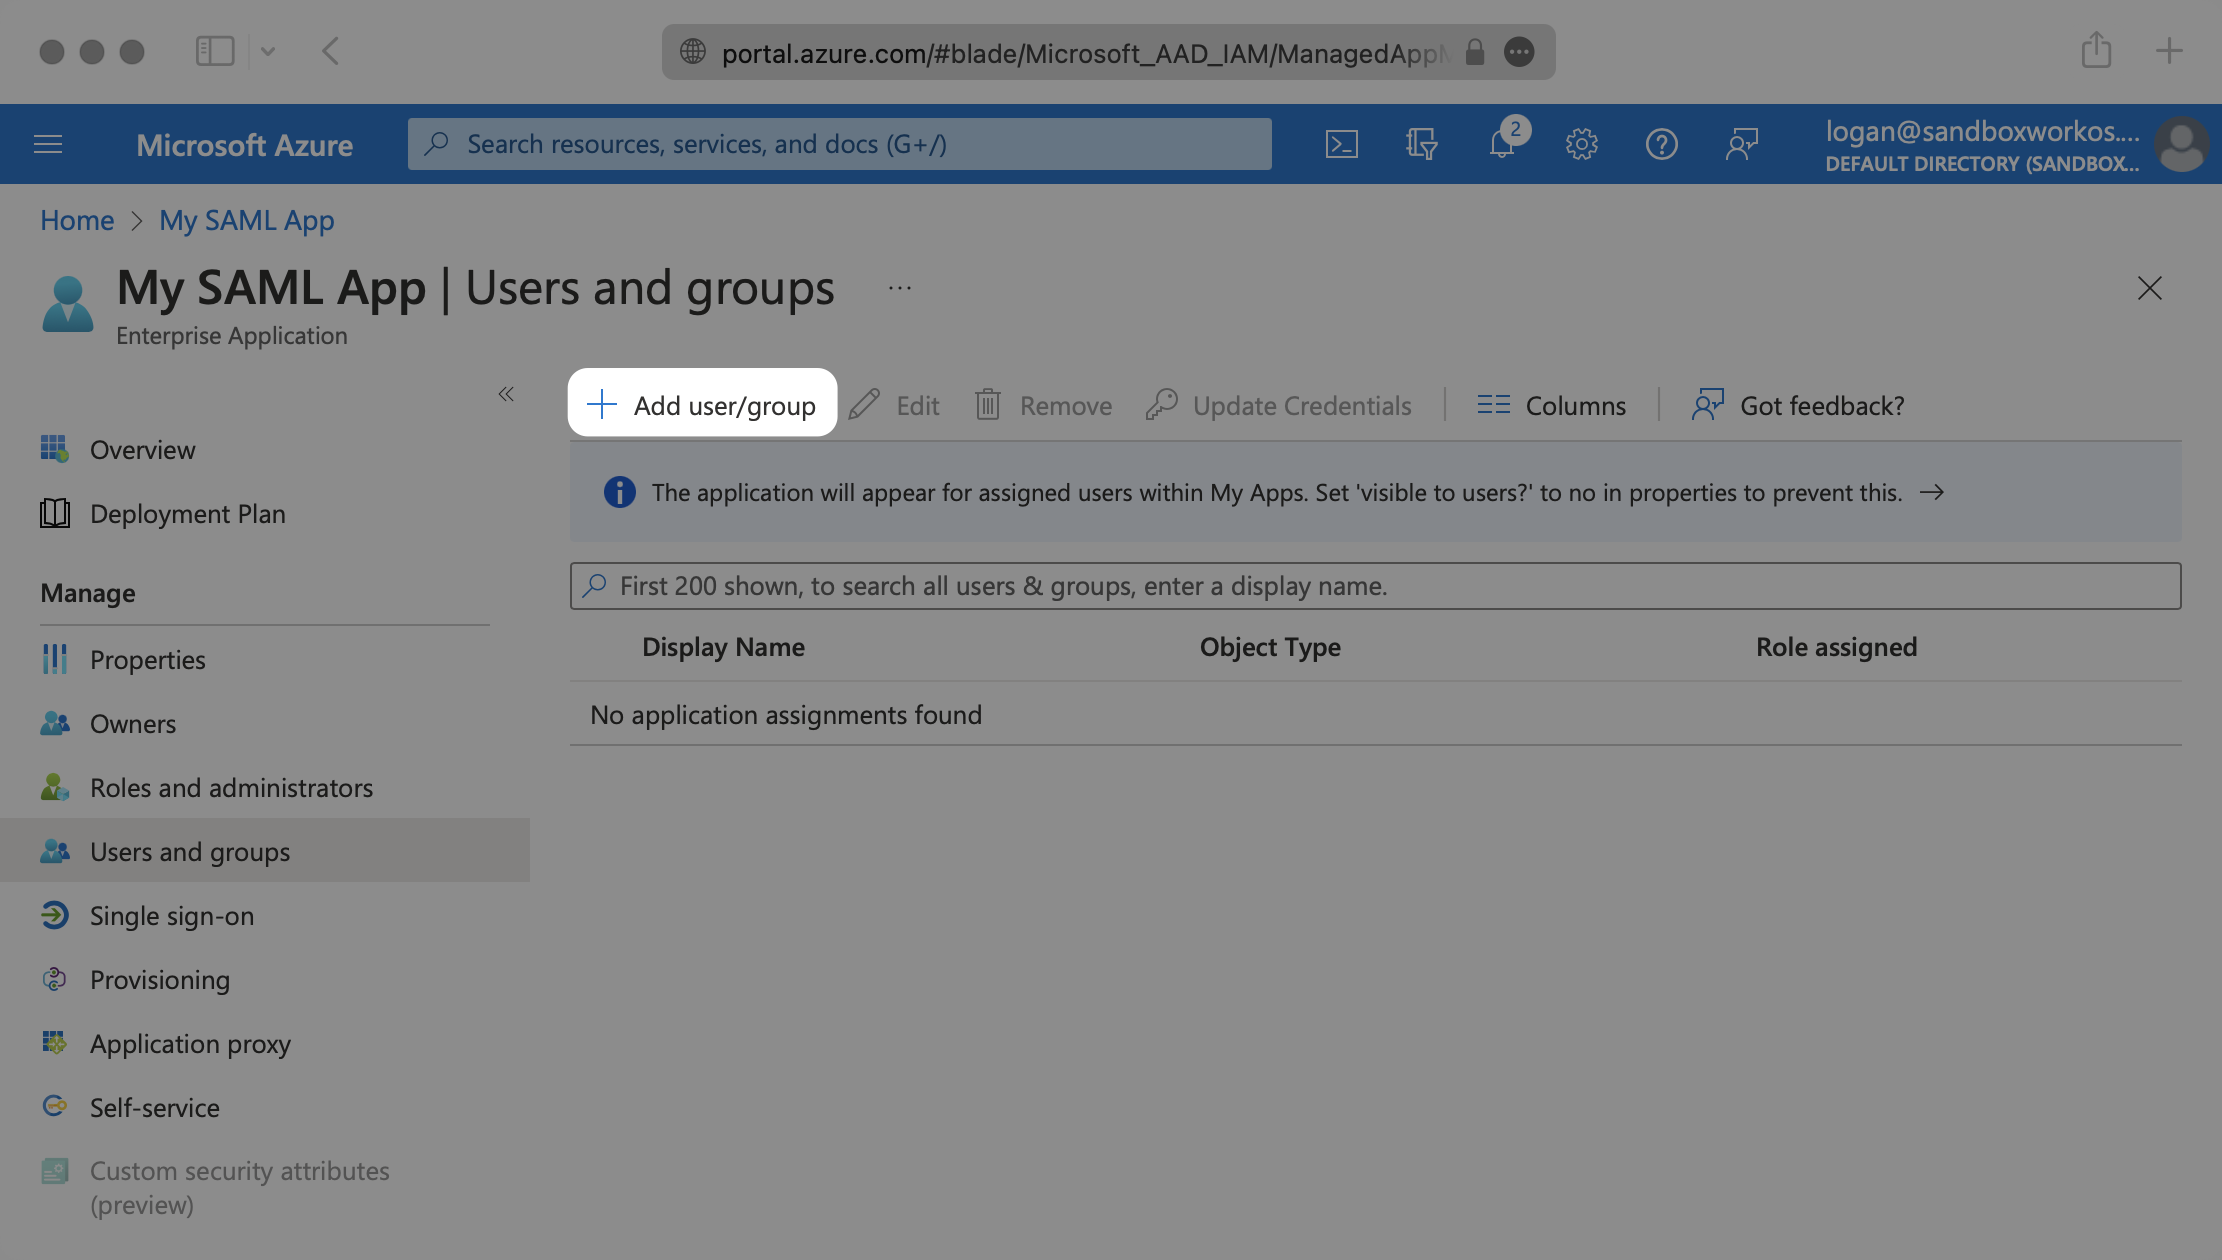 A screenshot showing where to select "Add user/group" in the Azure dashboard.